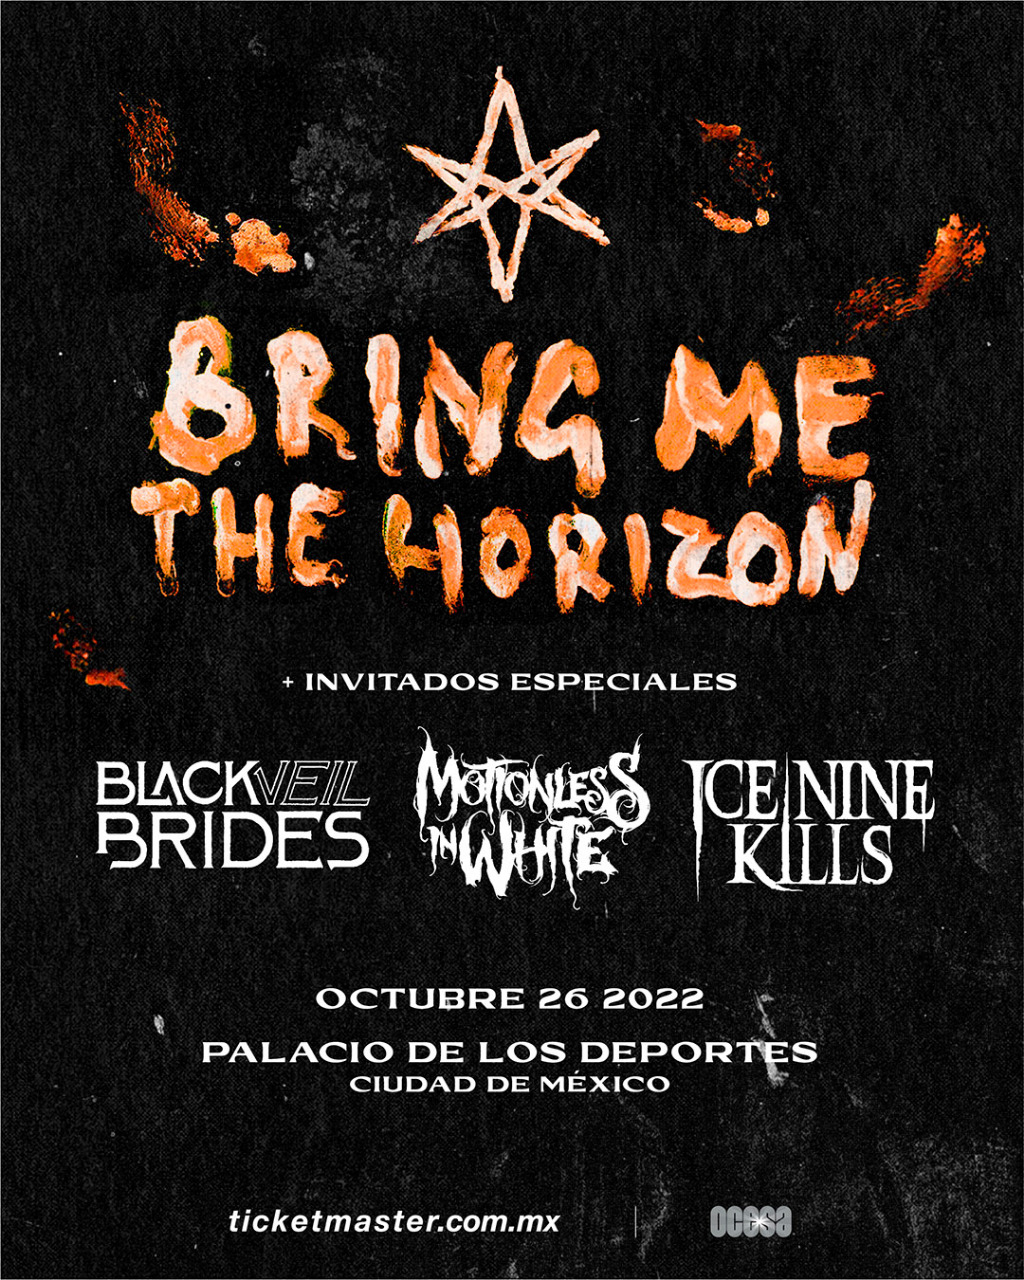 Bring Me The Horizon fall 2022 tour: Where and when can I buy